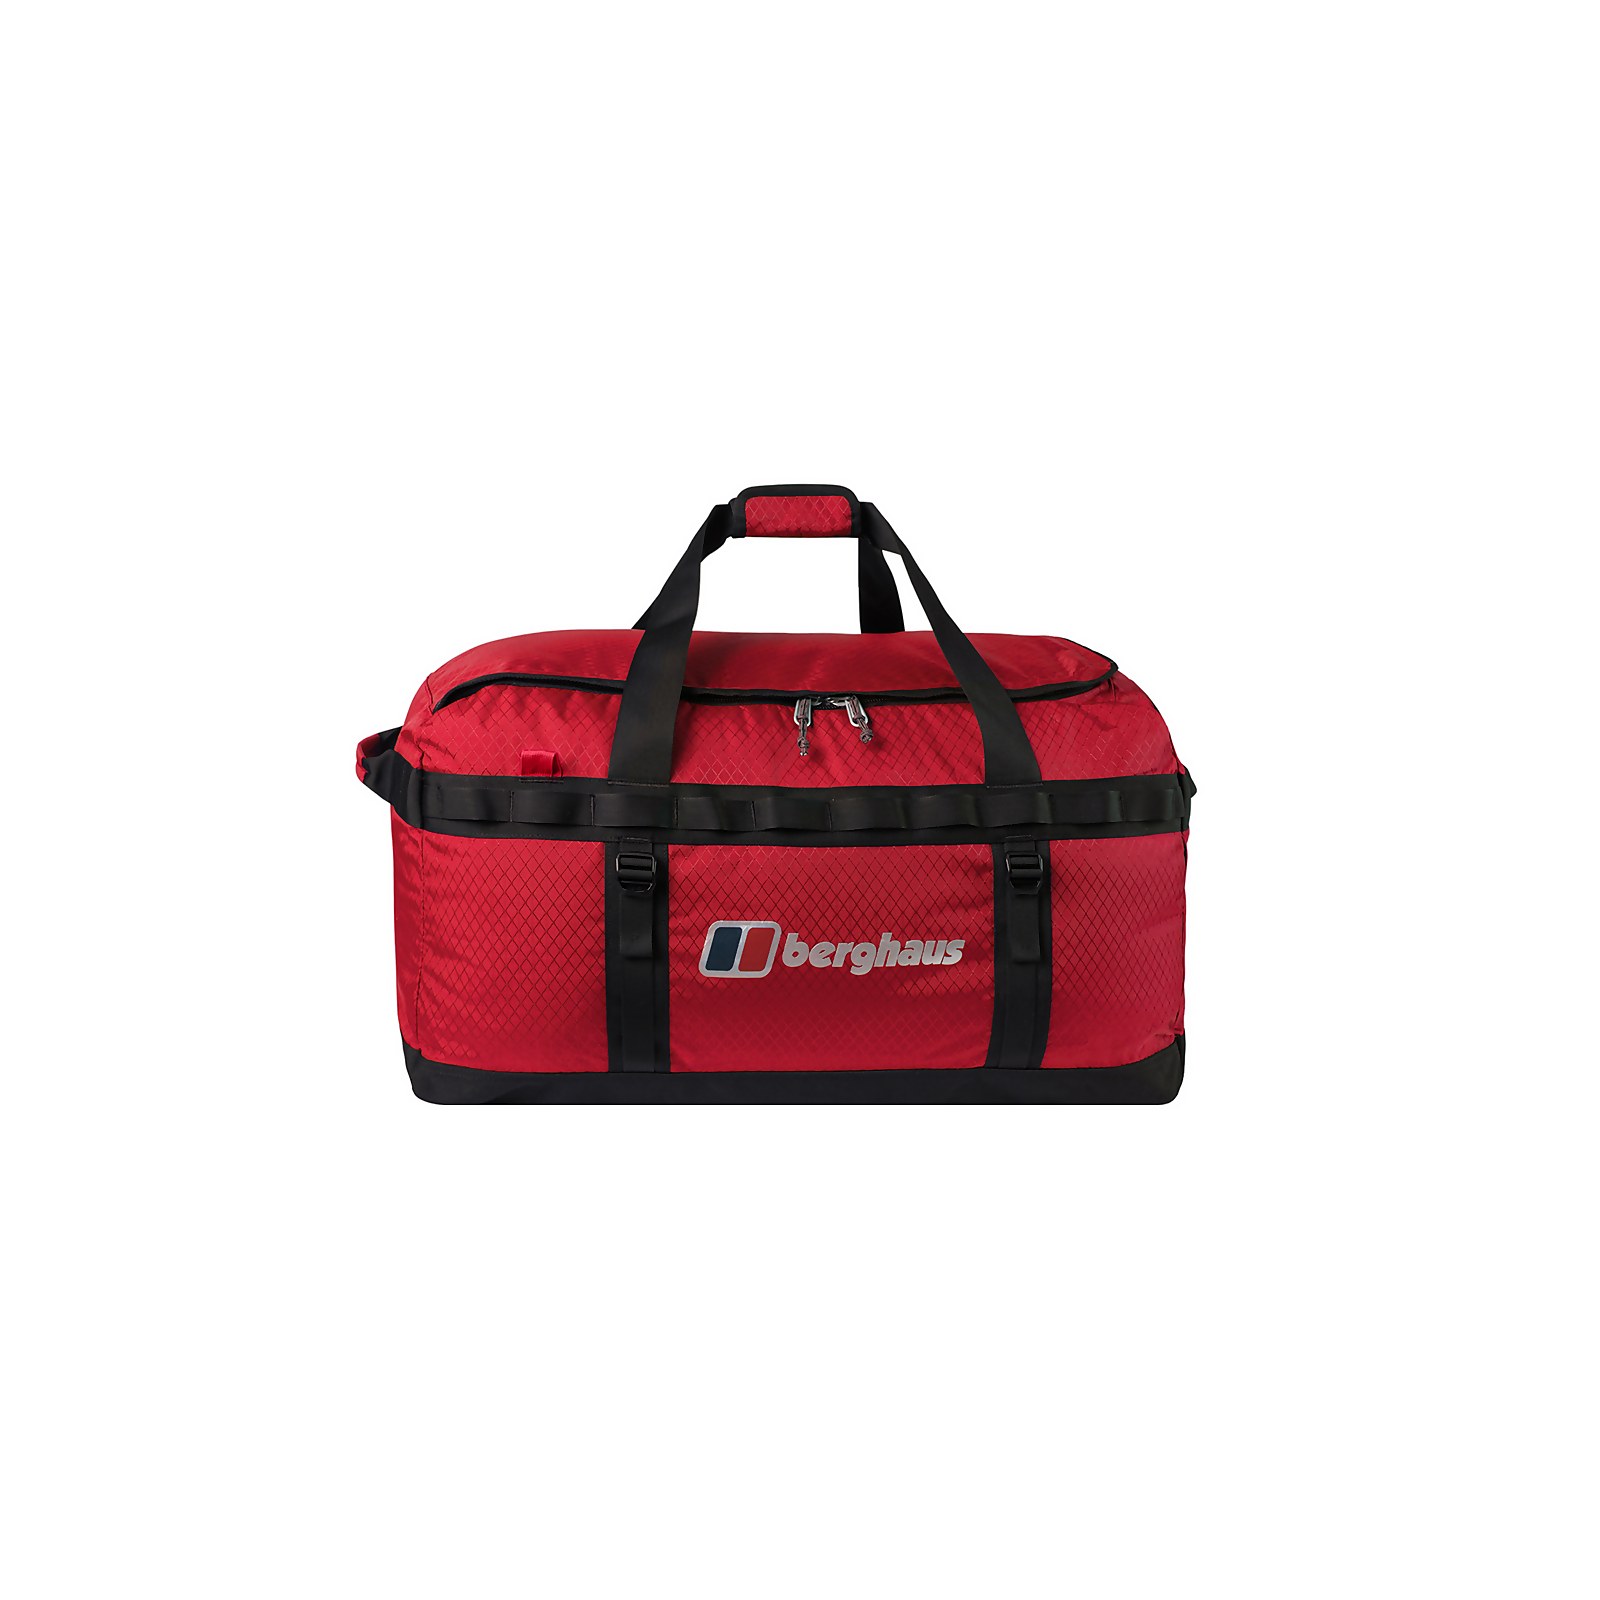 Berghaus Expedition Mule 60 - Red / Black - One Size